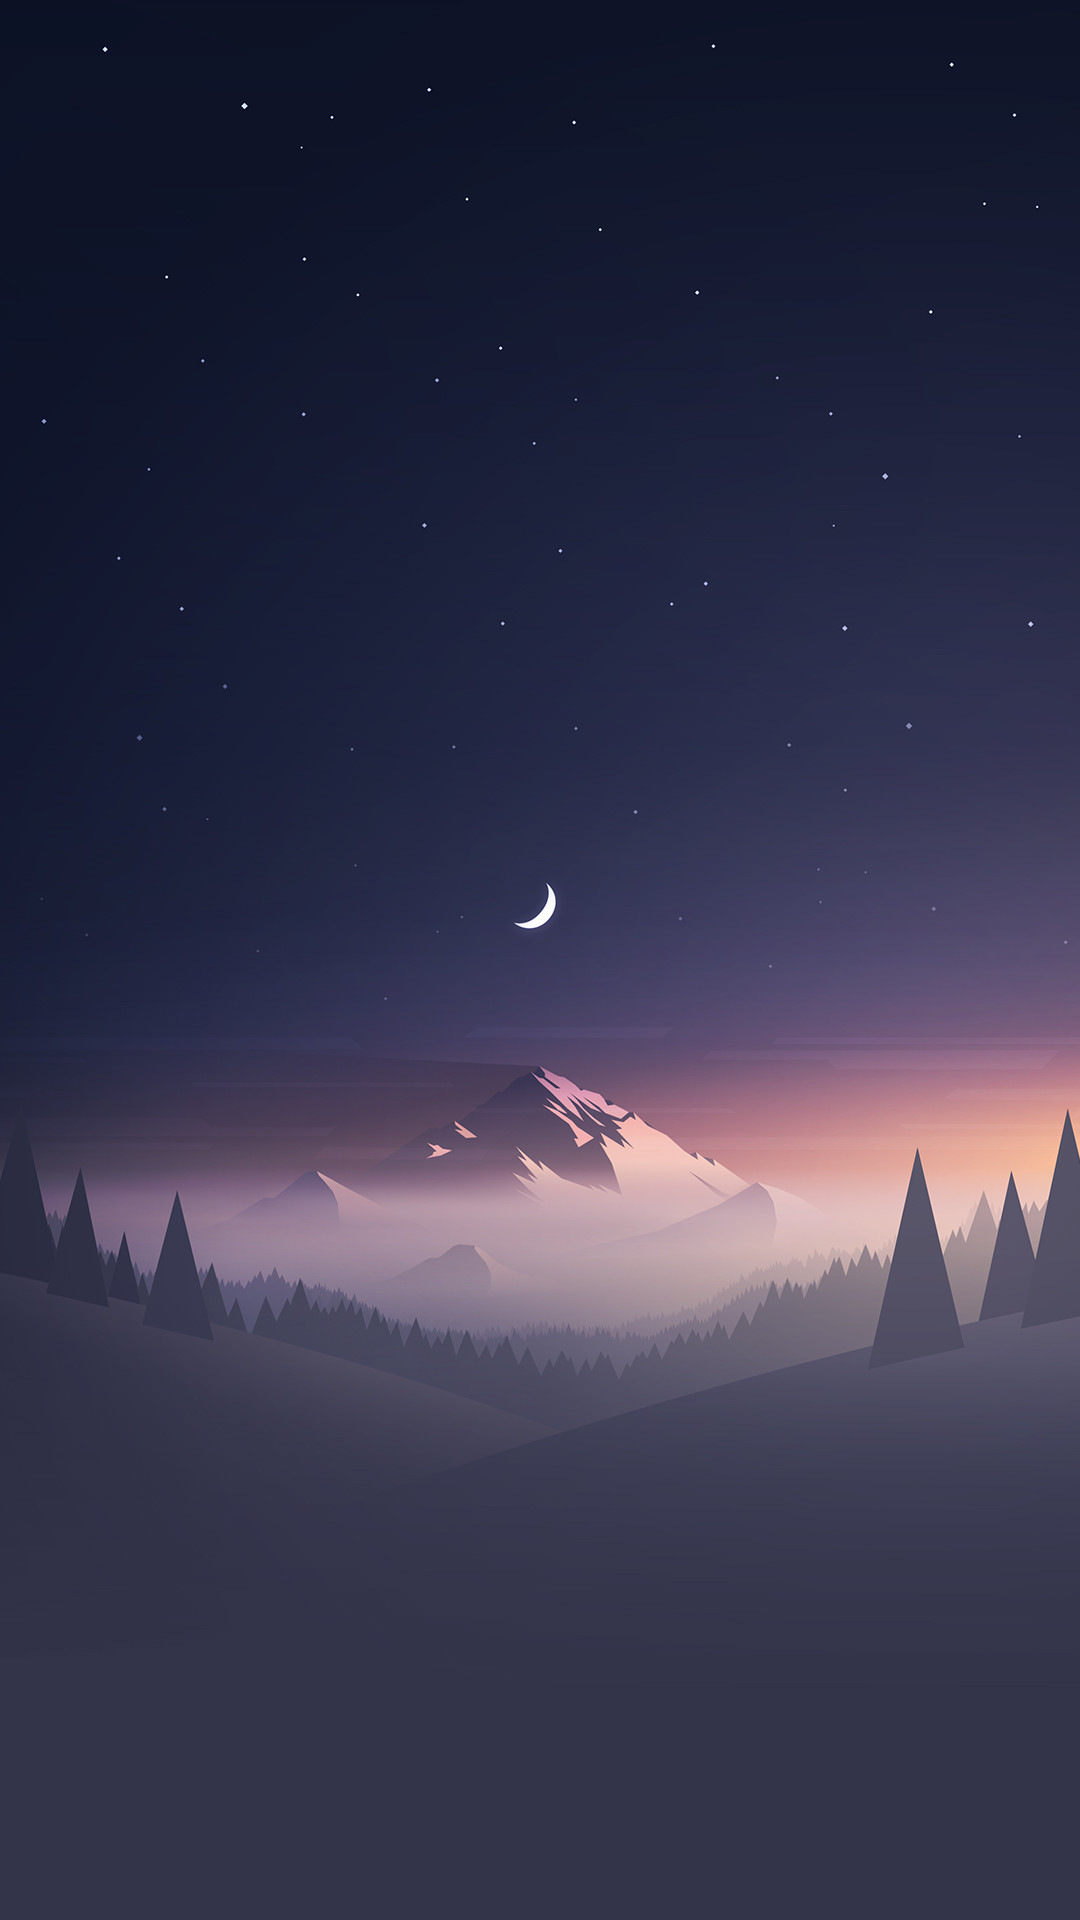 1080x1920 Stars And Moon Winter Mountain Landscape iPhone 6+ HD Wallpaper